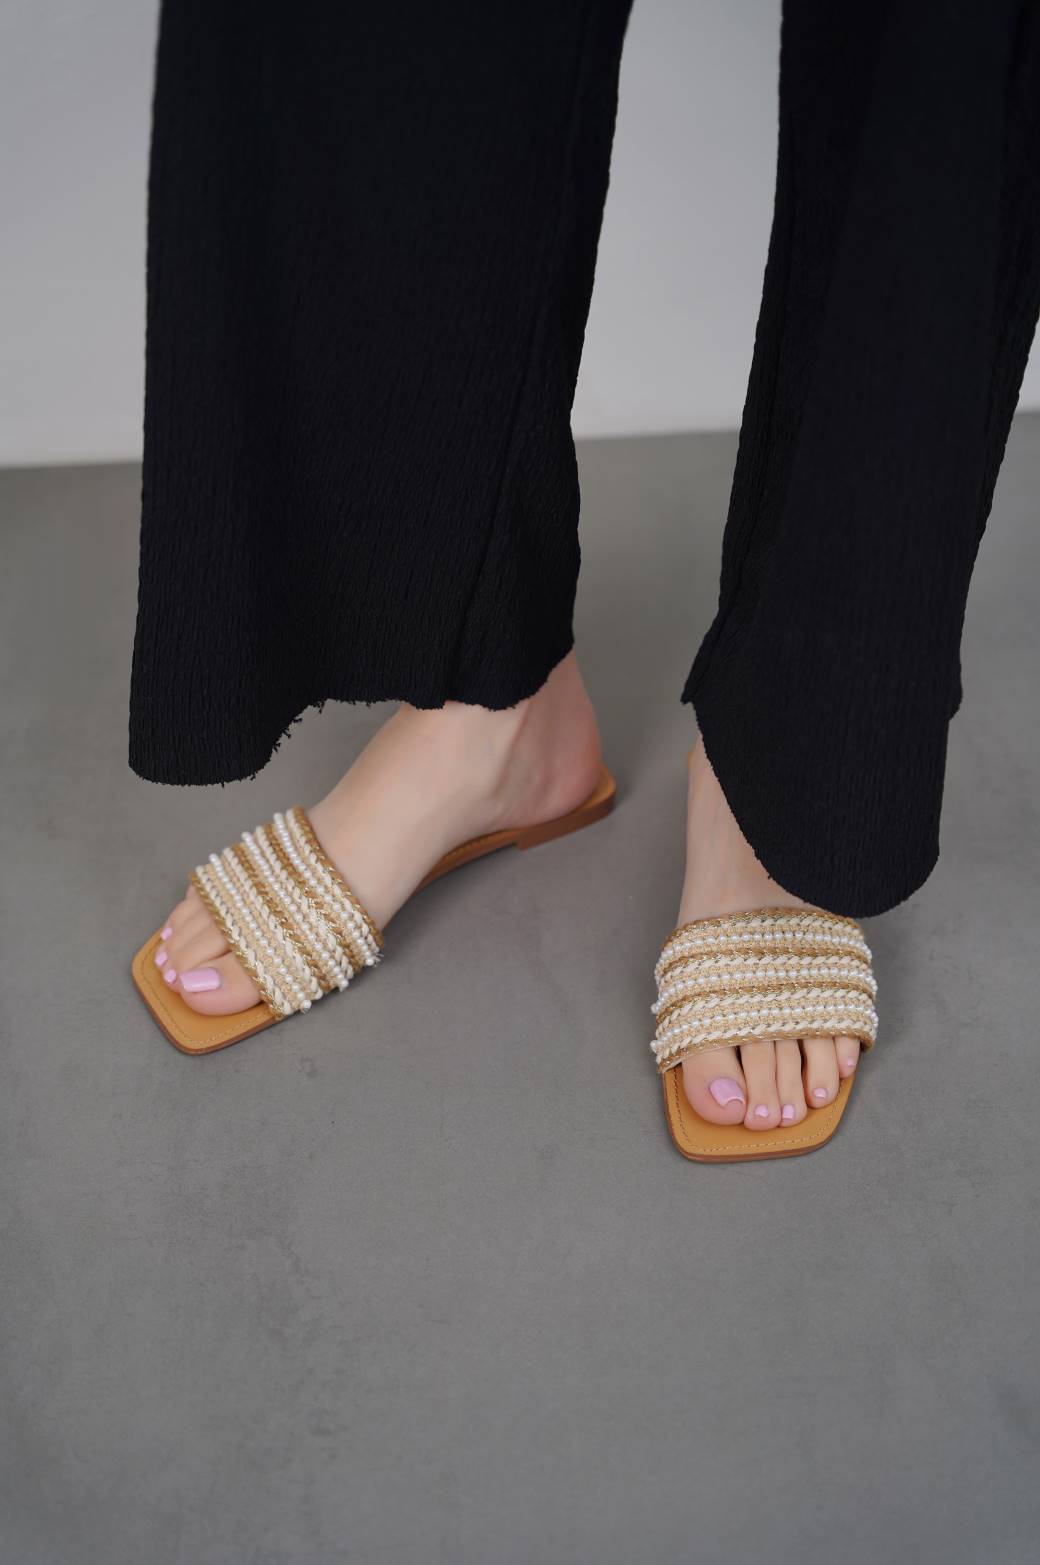 CAMEL WOVEN PEARL SLIDES